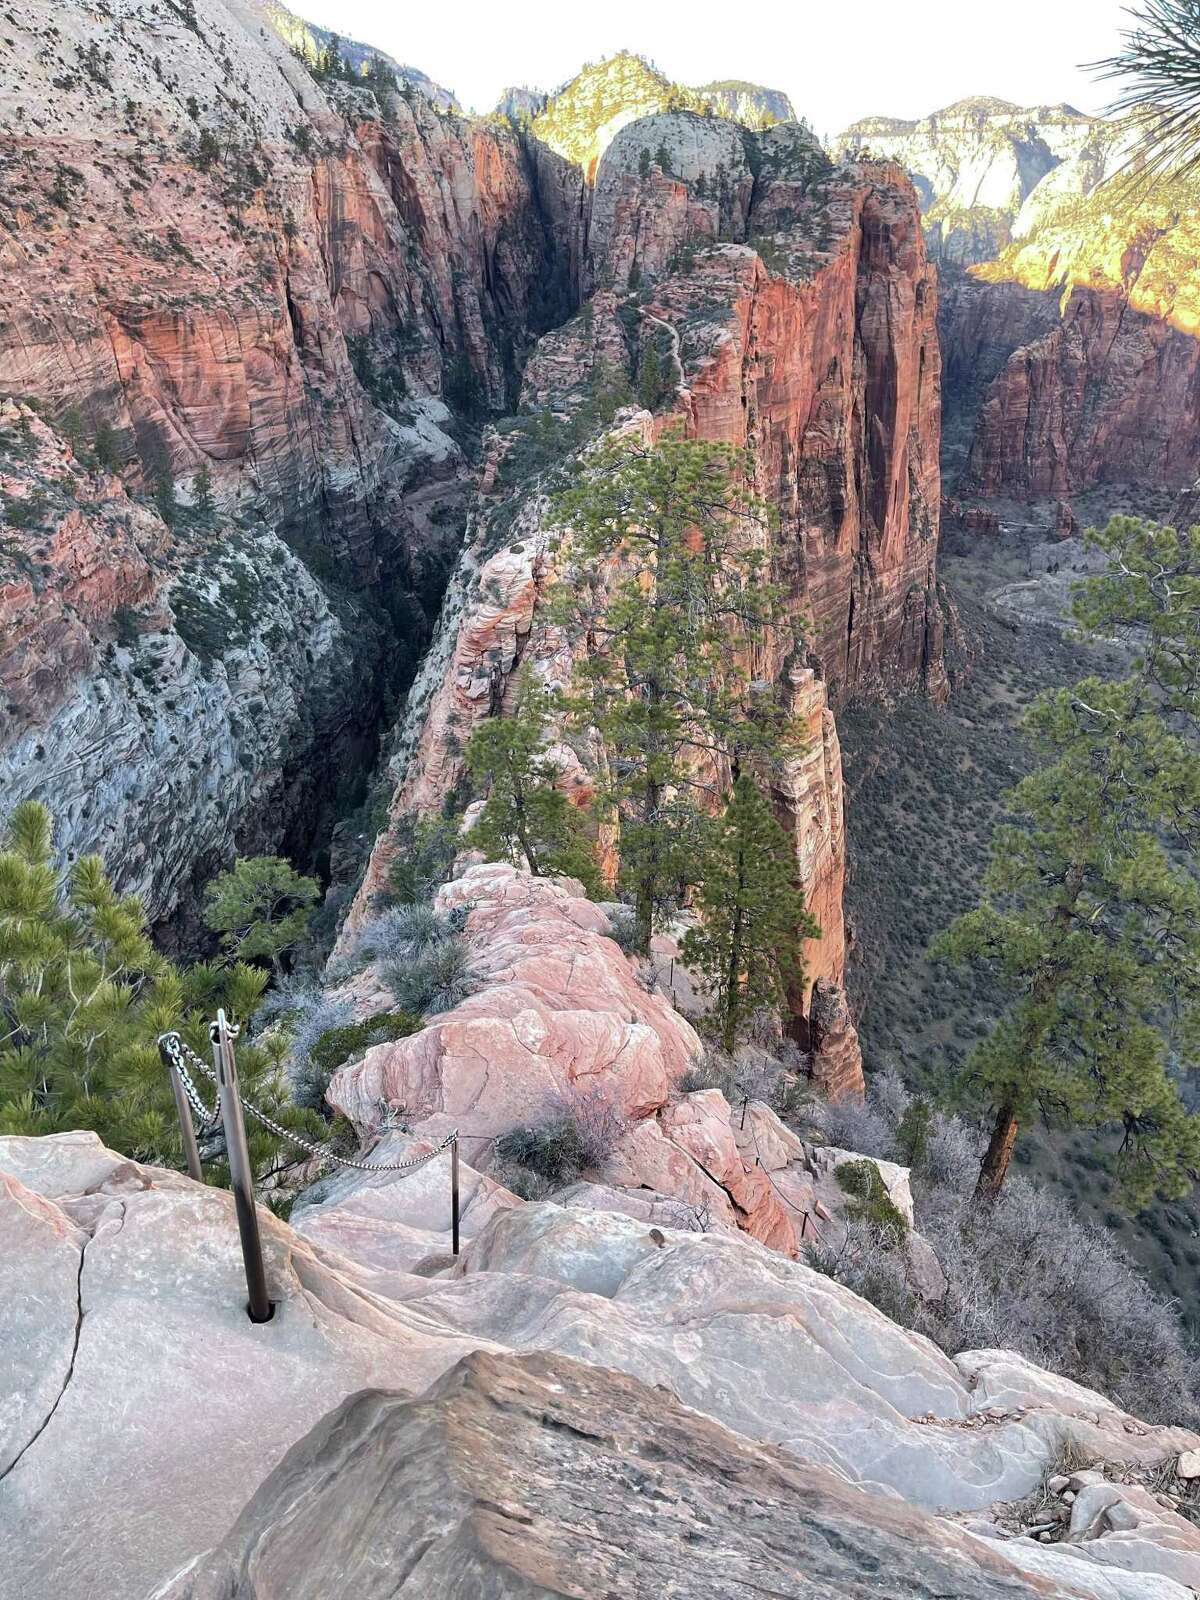 View on the way down from Angels Landin in Zion National Park